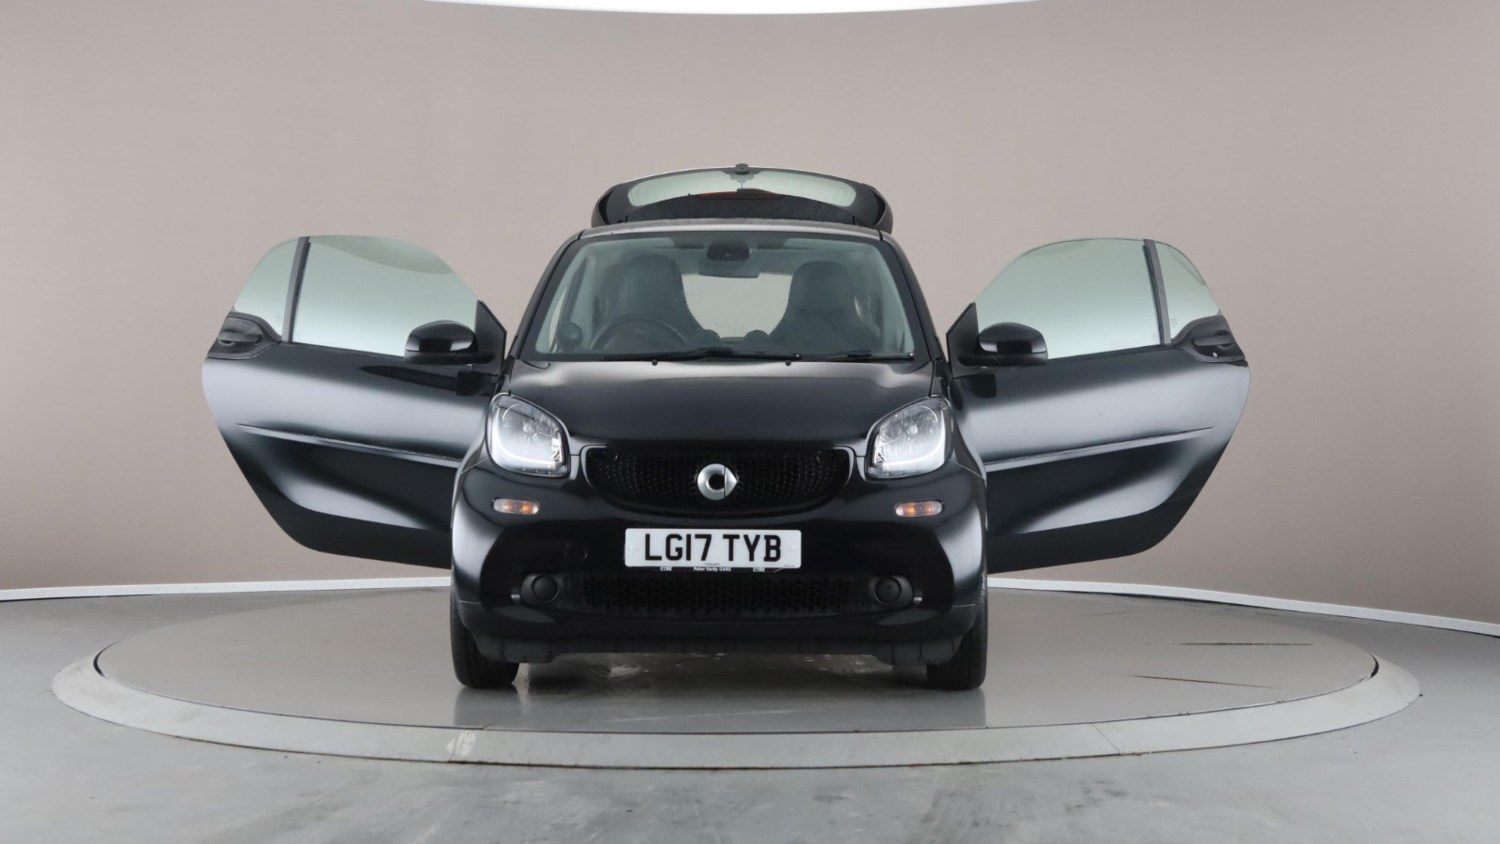 Smart fortwo Listing Image